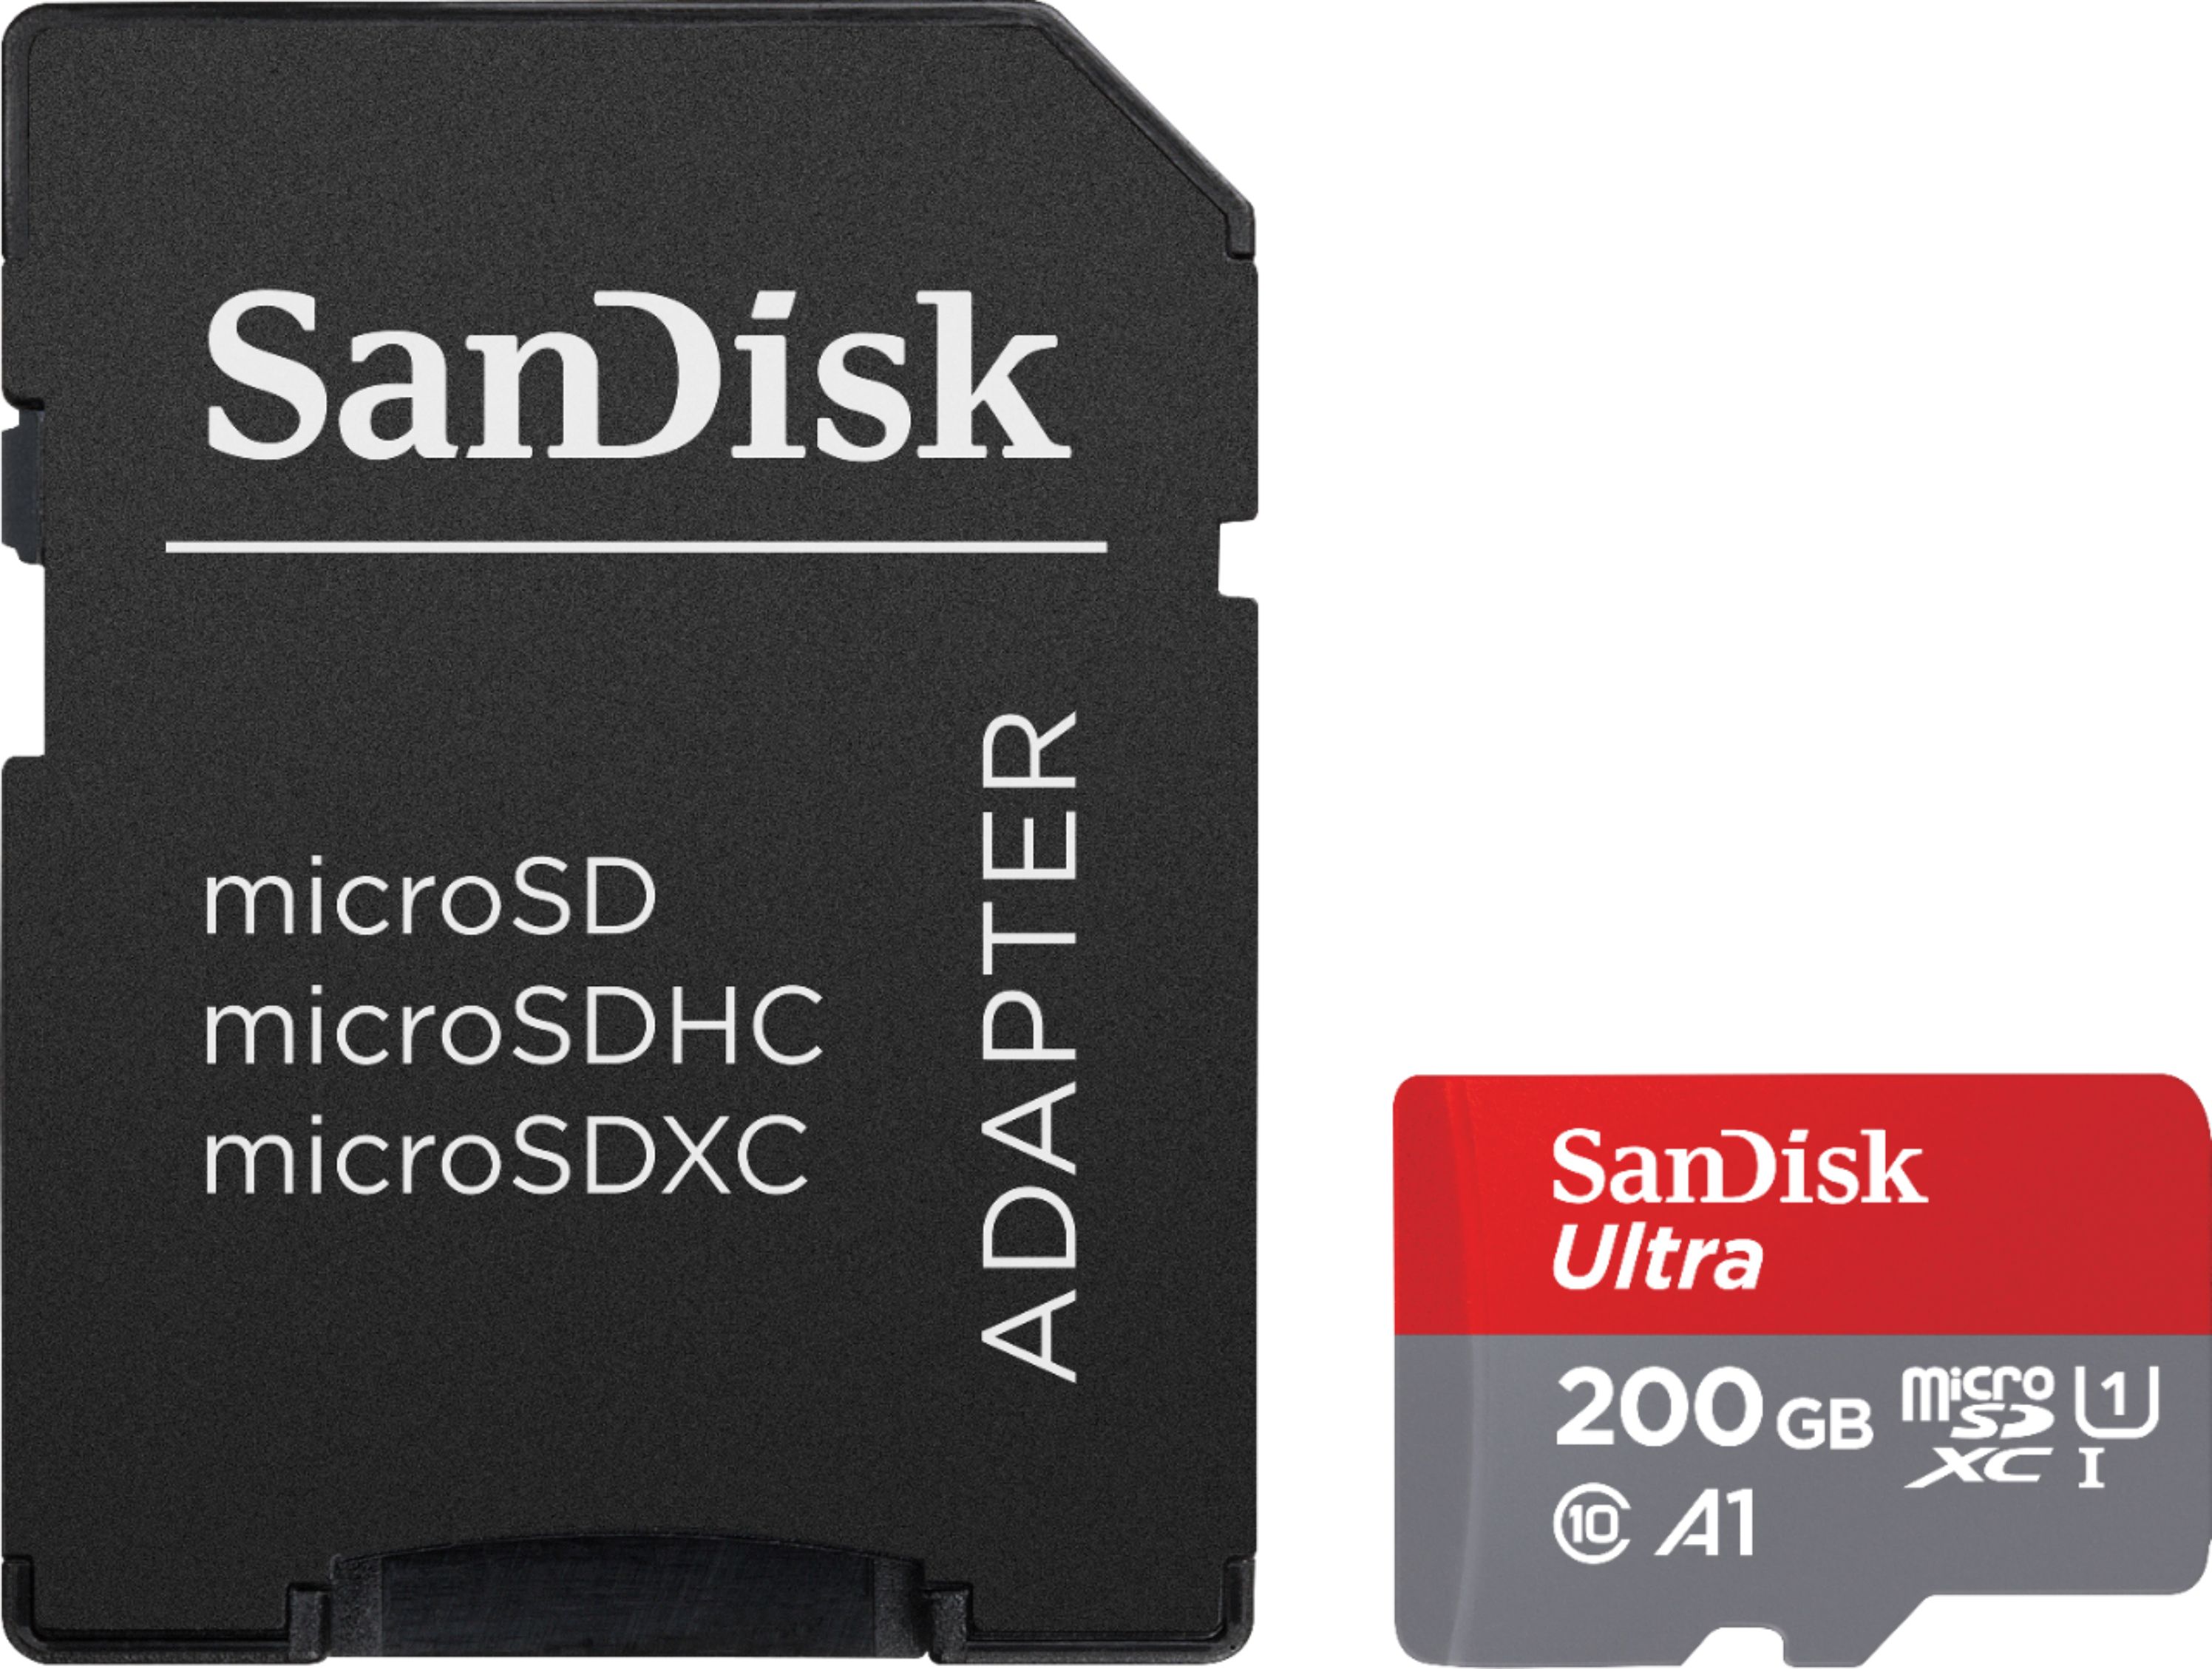 100MBs A1 U1 C10 Works with SanDisk SanDisk Ultra 200GB MicroSDXC Verified for HTC One Mini 2 by SanFlash